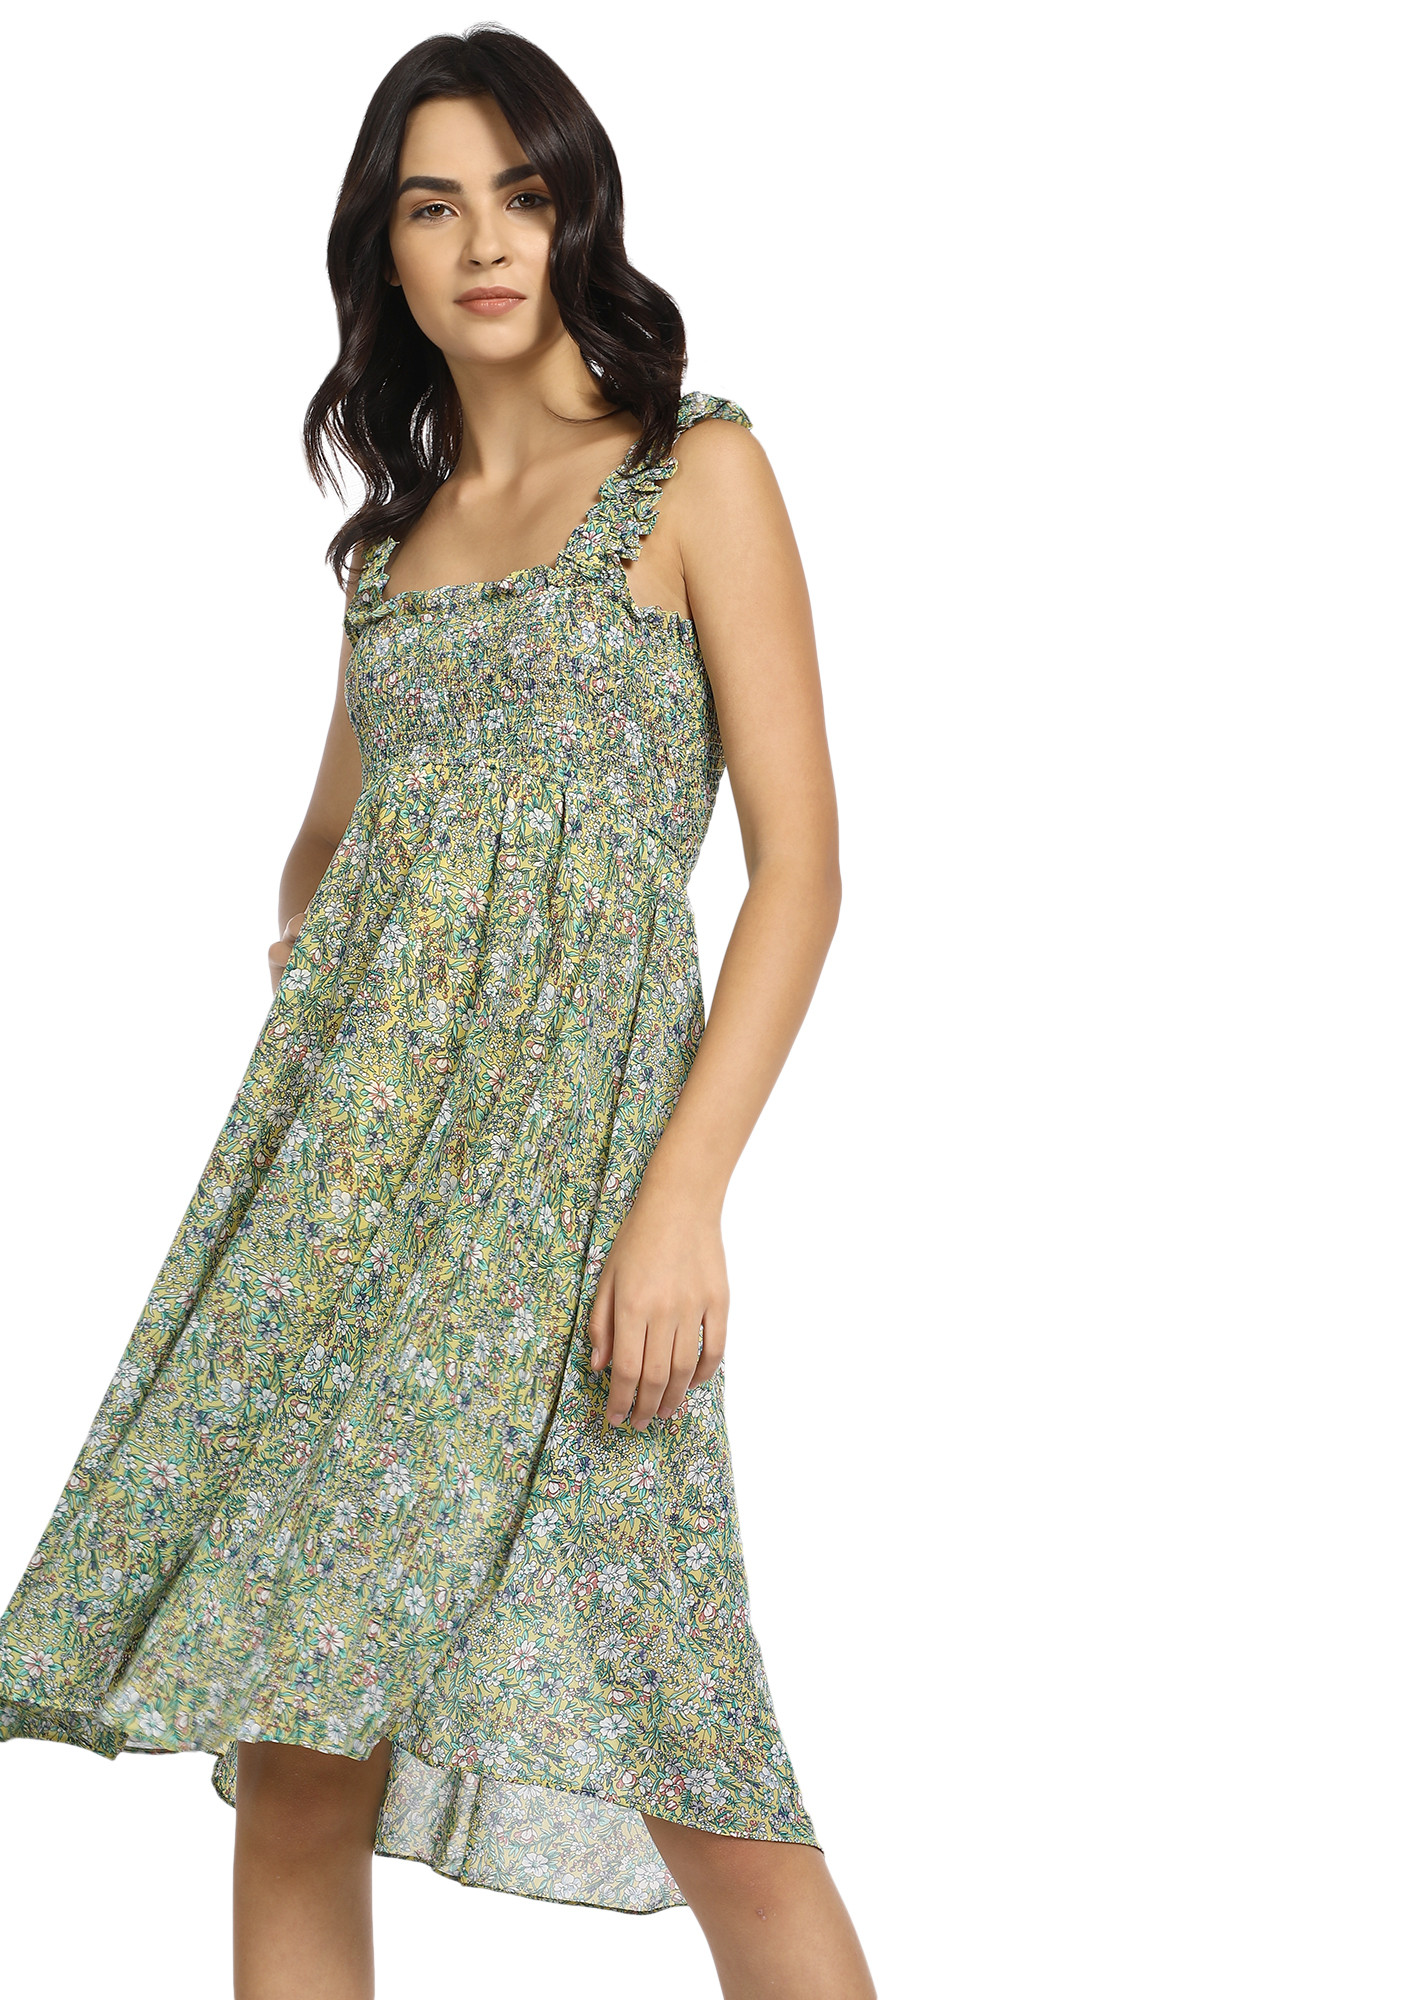 Driven By The Flower Power Green Midi Dress